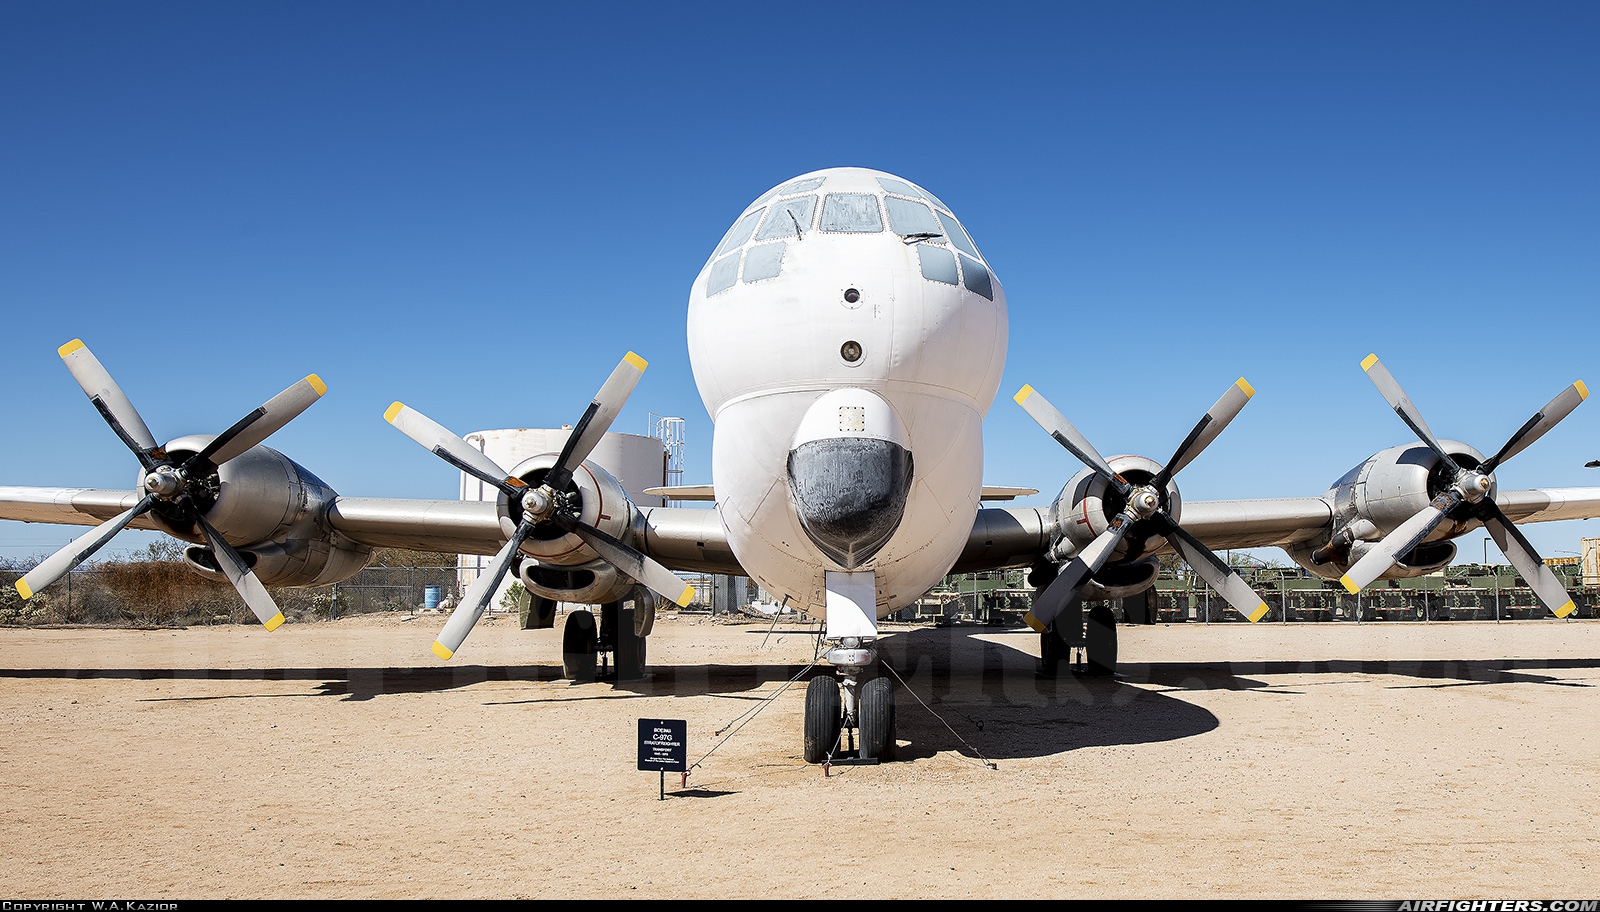 USA - Air Force Boeing KC-97G Stratofreighter (367-76-66) 52-2626 at Tucson - Pima Air and Space Museum, USA